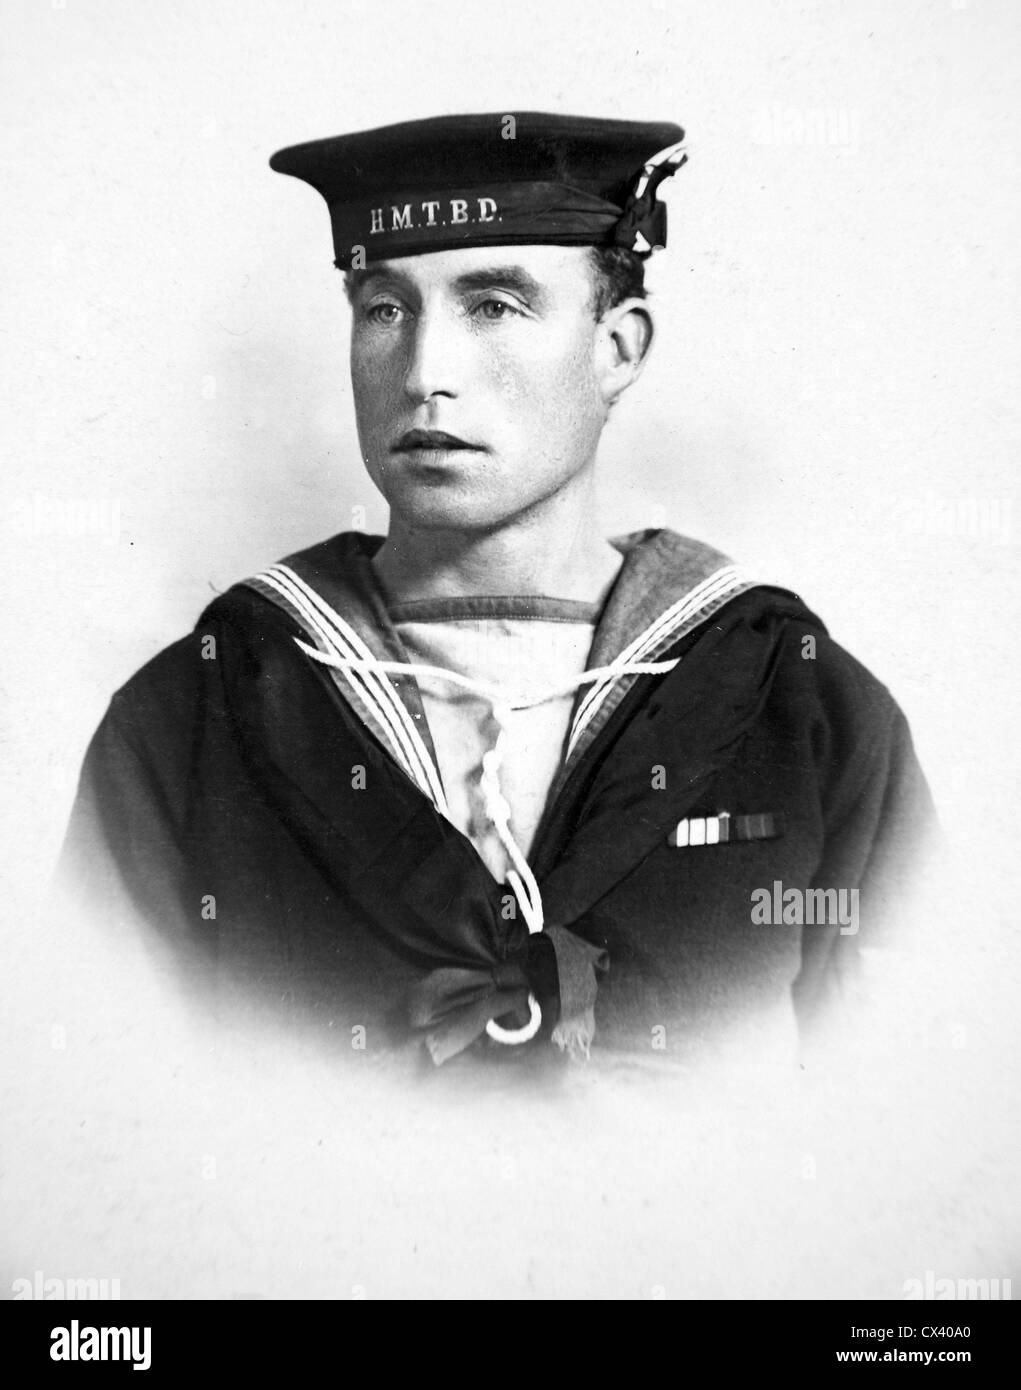 Royal Navy sailor of the Edwardian or Great War period in uniform. HM  Torpedo Boat Destroyer Stock Photo - Alamy